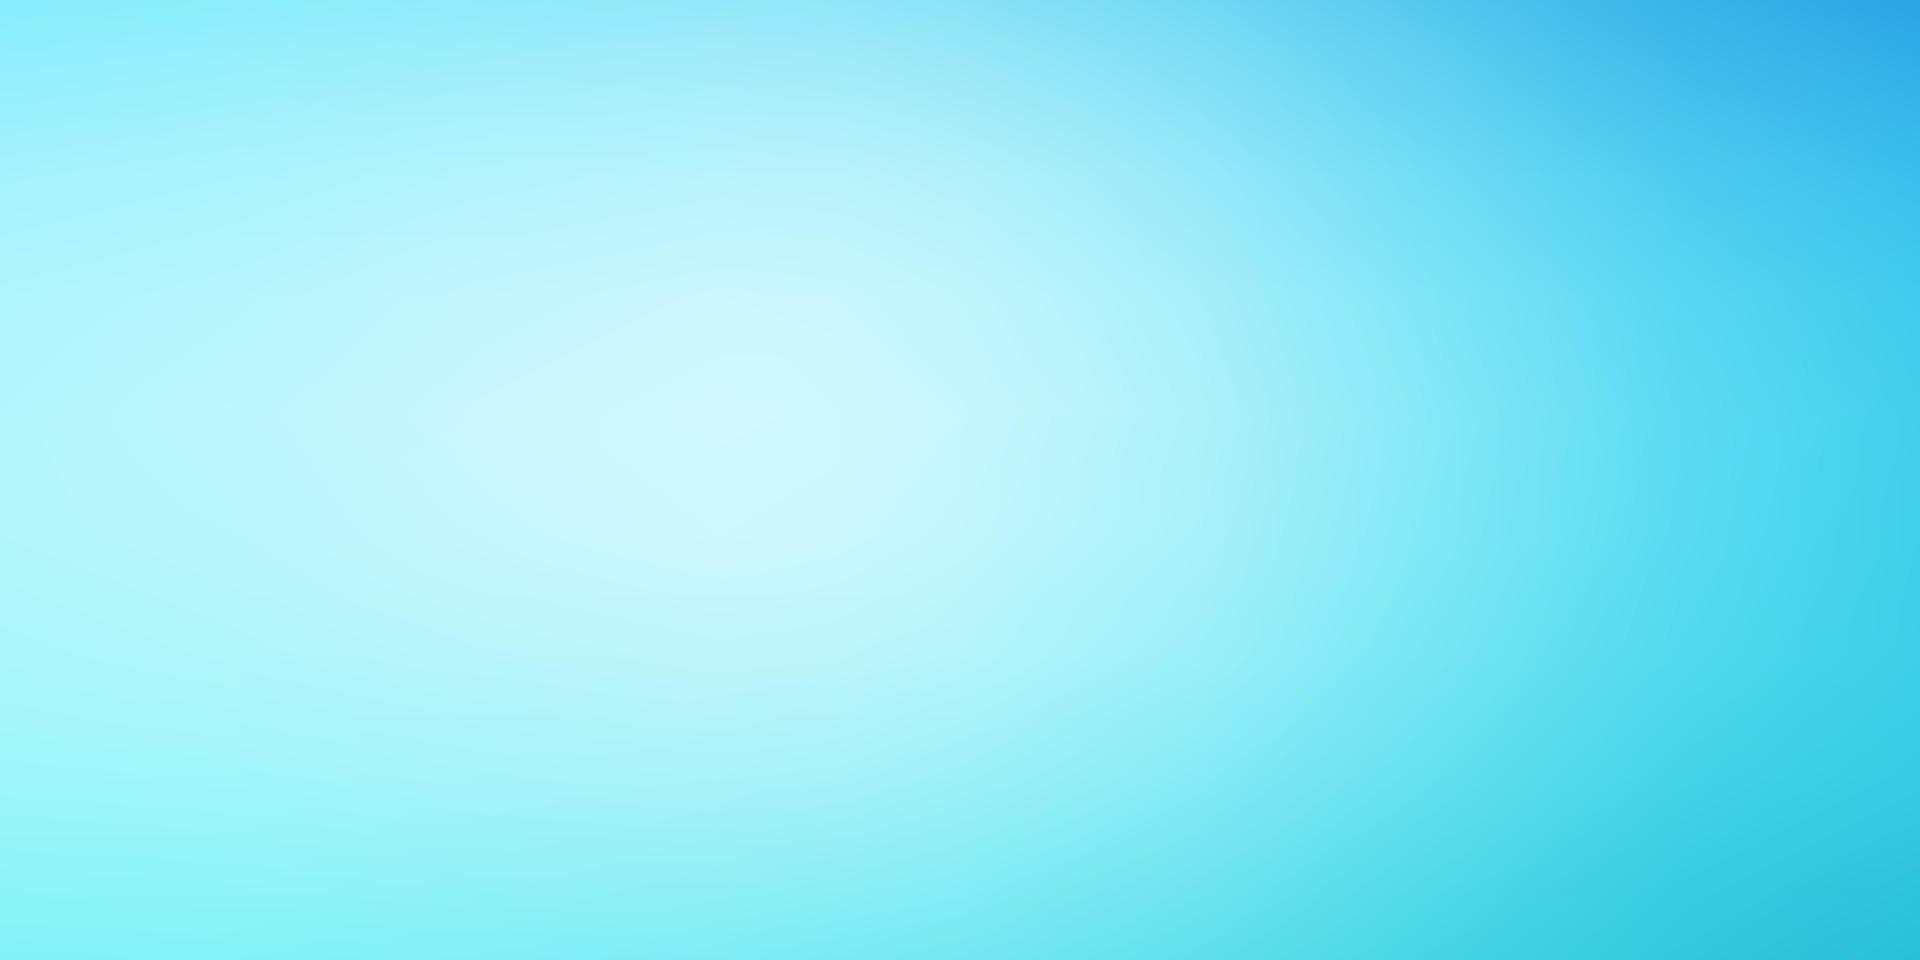 Light BLUE vector blurred colorful background.